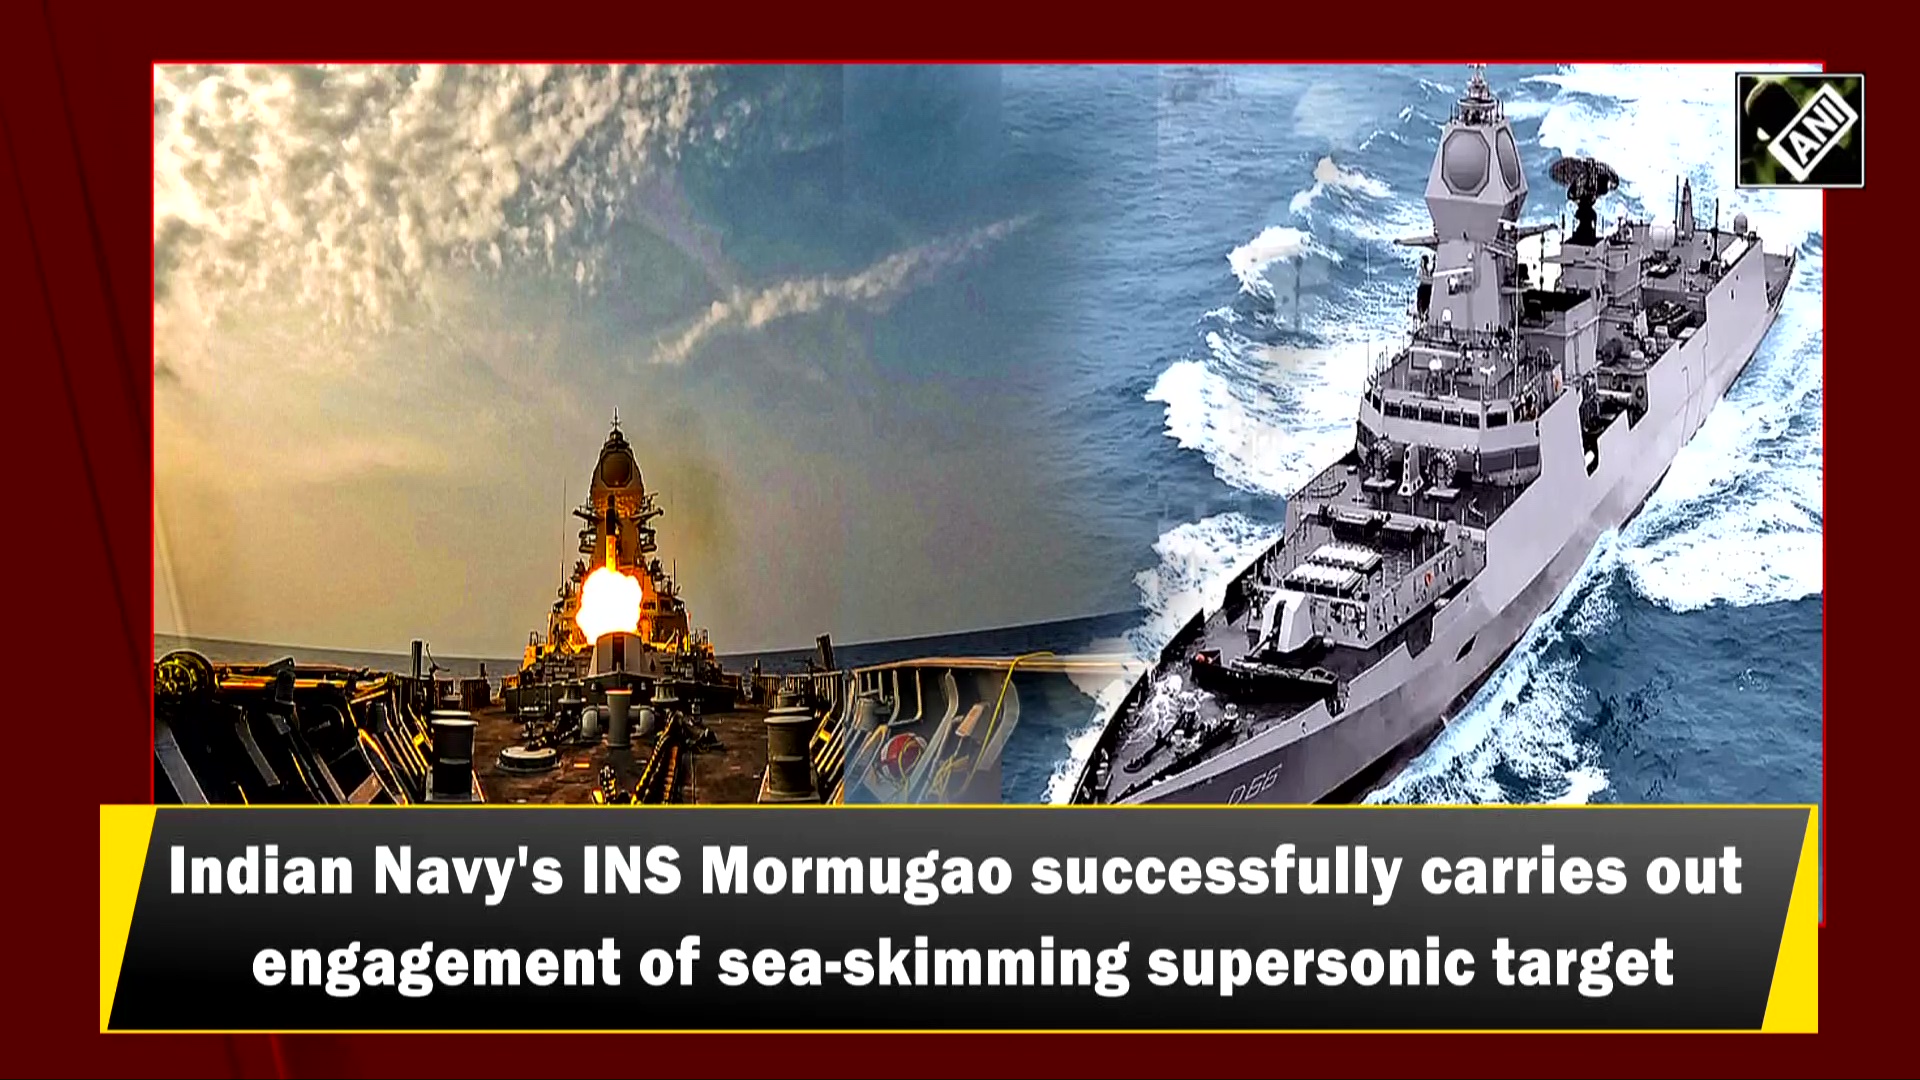 Indian Navy's INS Mormugao successfully carries out engagement of sea-skimming supersonic target